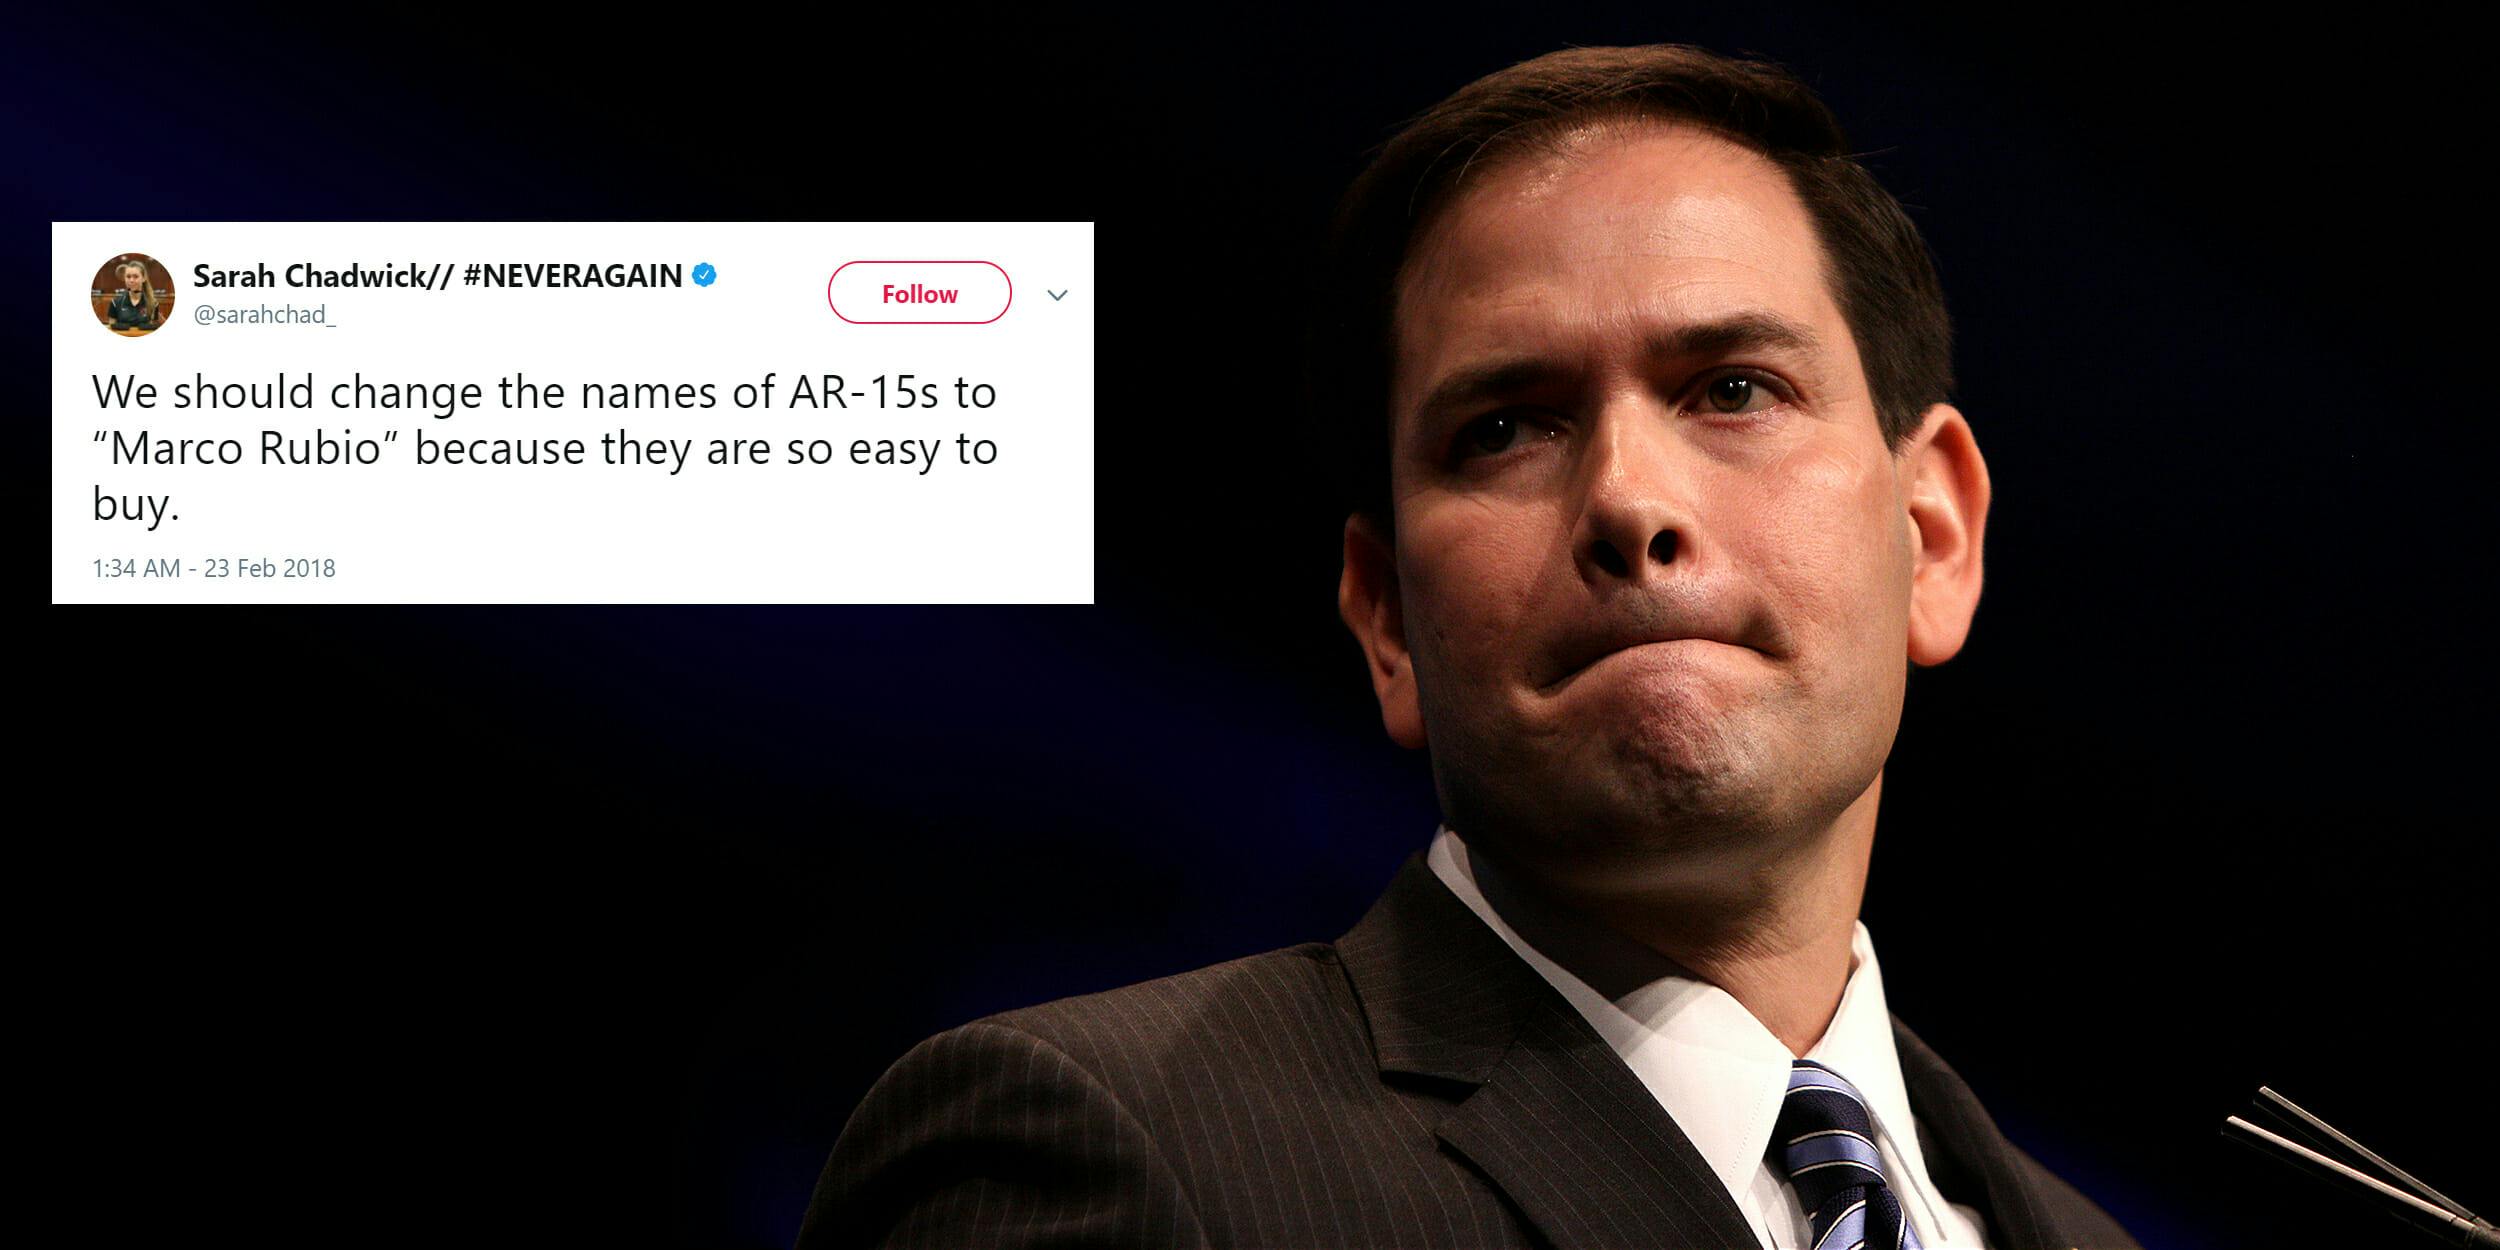 Marco Rubio with "We should change the names of AR-15s to 'Marco Rubio' becaues they are so easy to buy" tweet